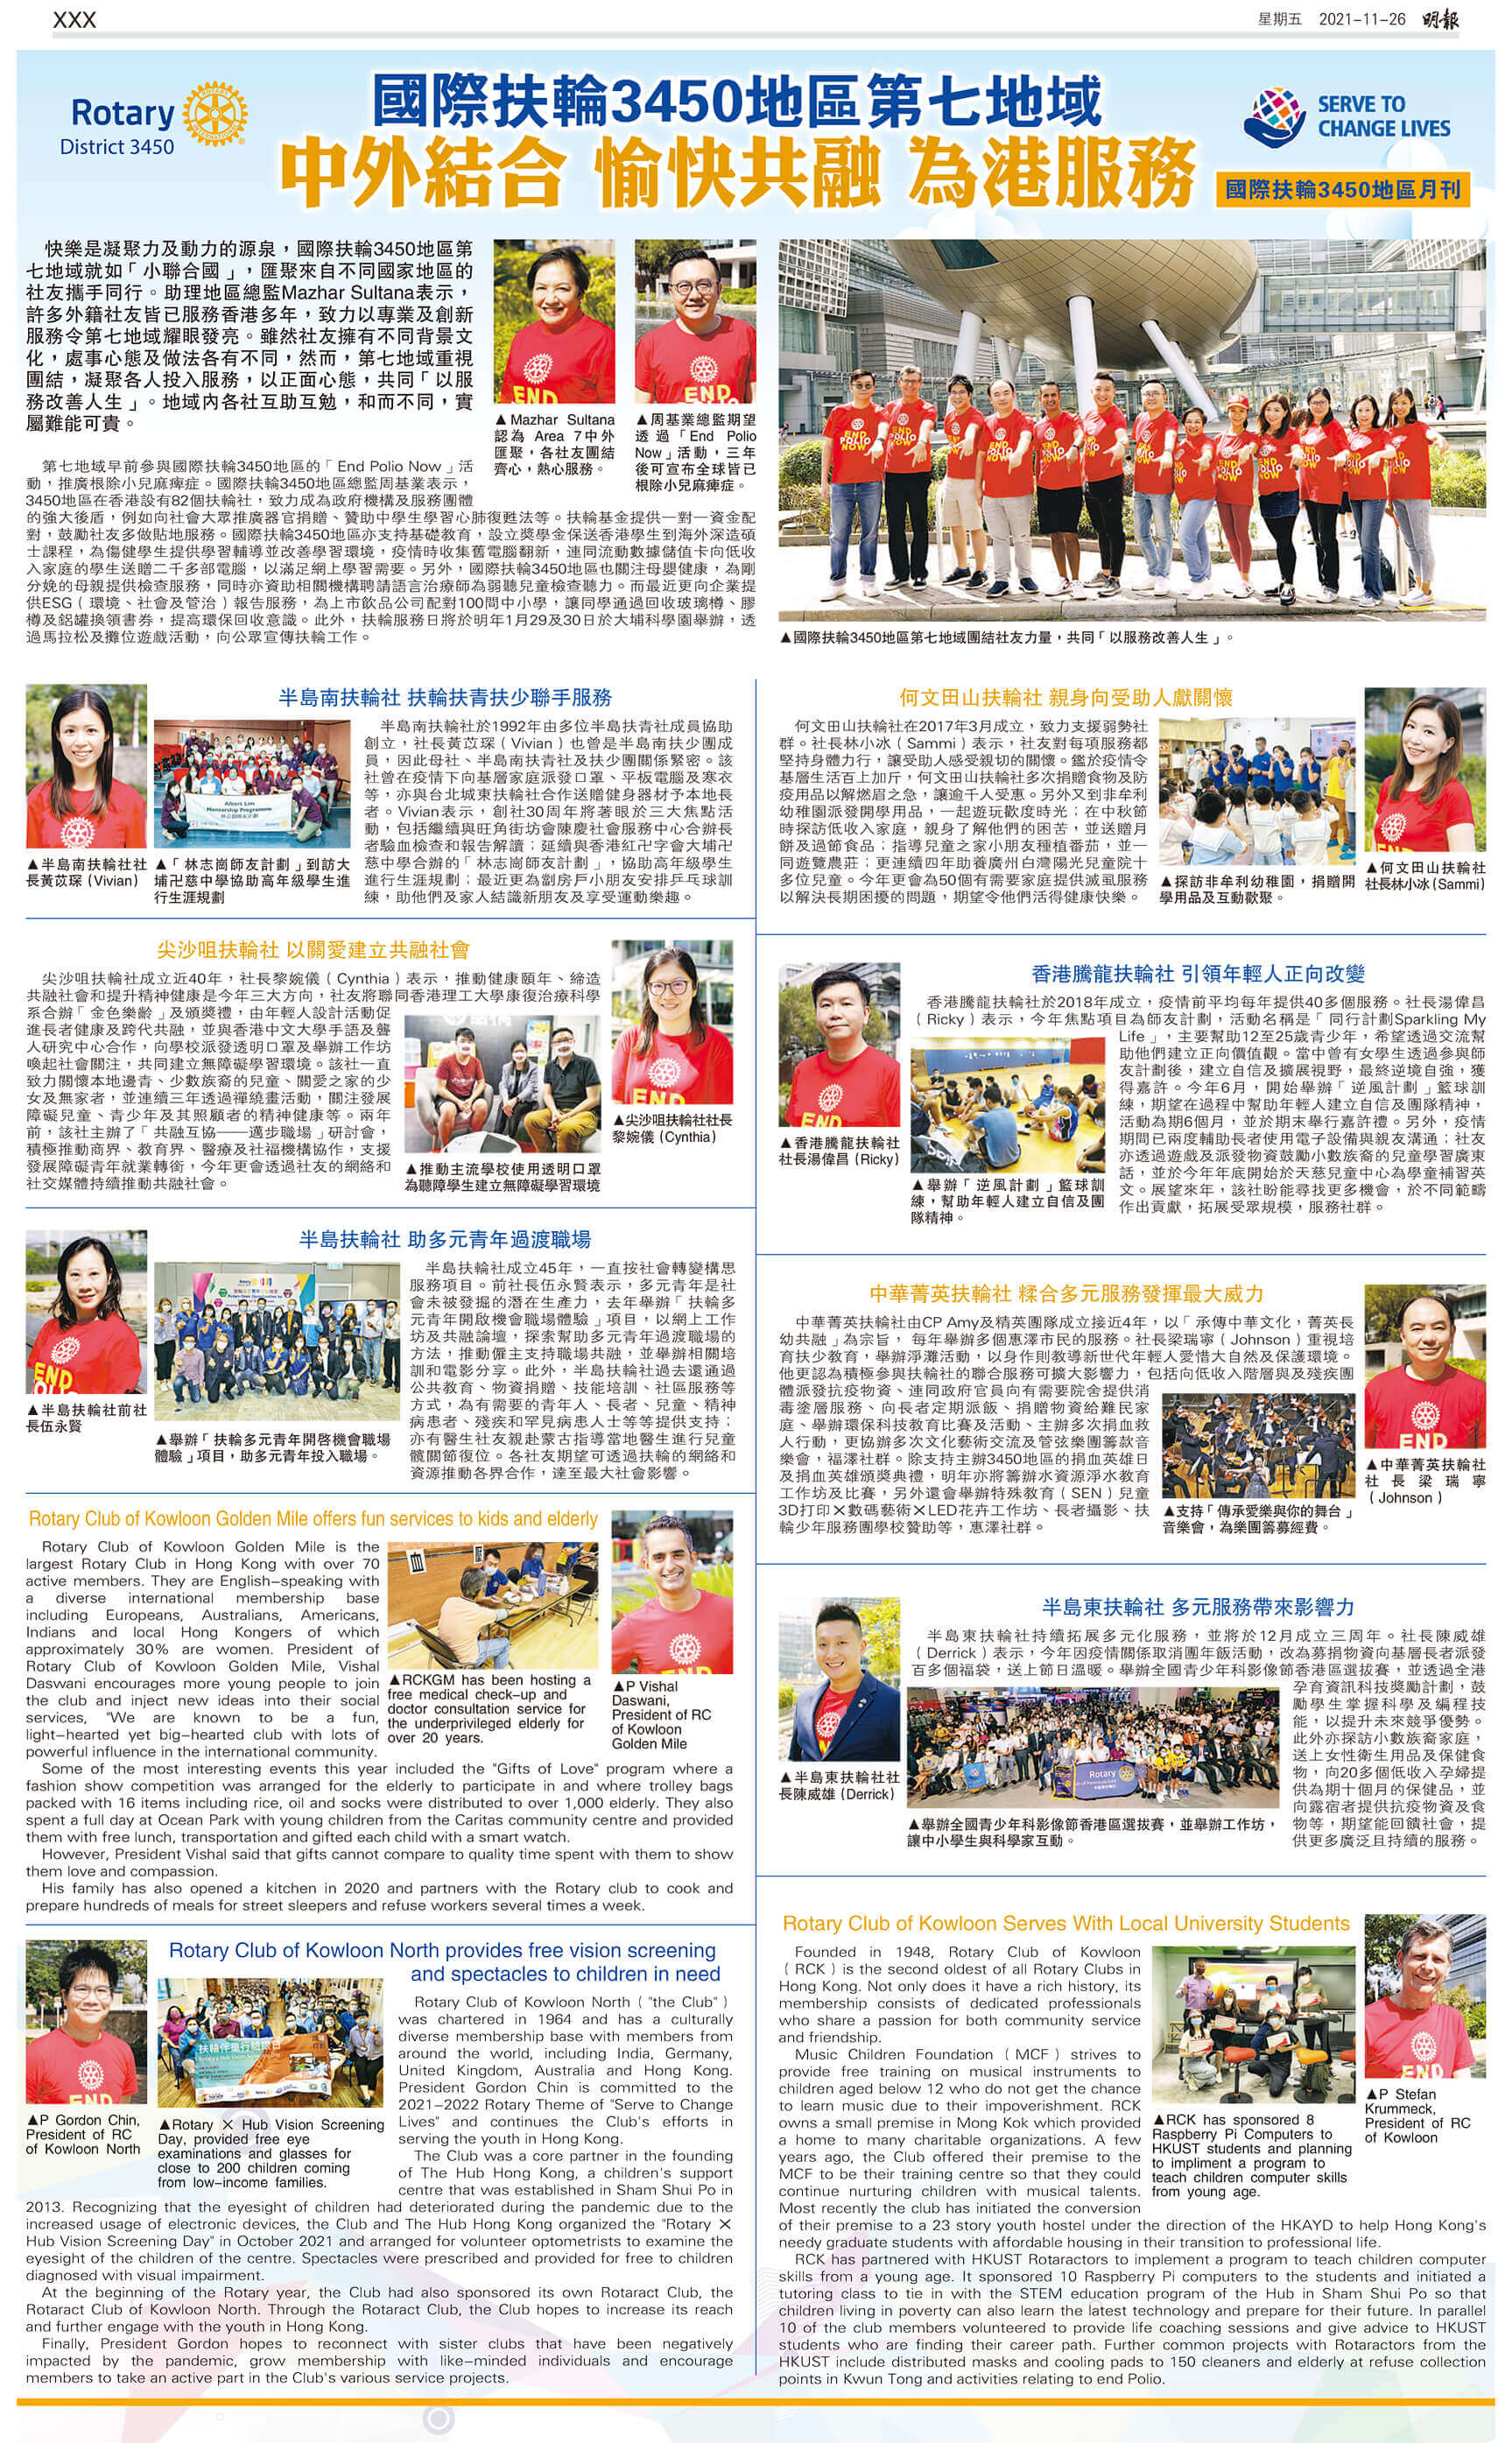 Area 7 Ming Pao interview